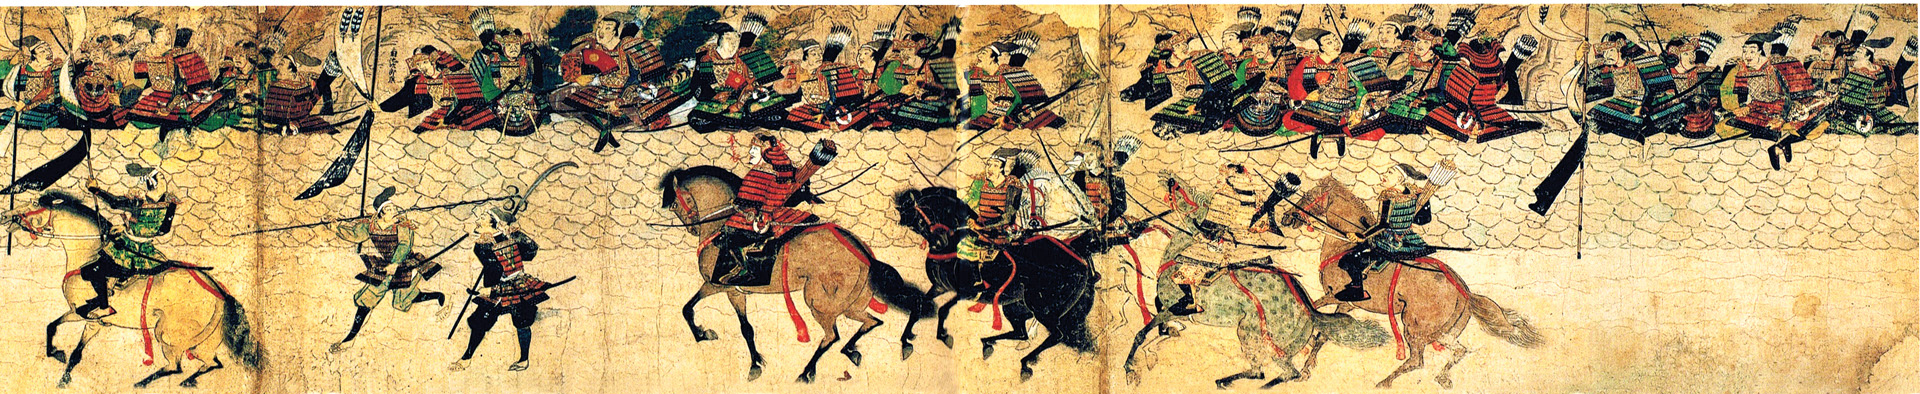 Six-foot-high defensive walls at Hakata Bay are shown in a period scroll painting. The landward side of the walls, which were constructed in advance of the 1281 invasion, had an earthen embankment that served as a platform from which both mounted samurai and foot archers could launch clouds of deadly arrows. 